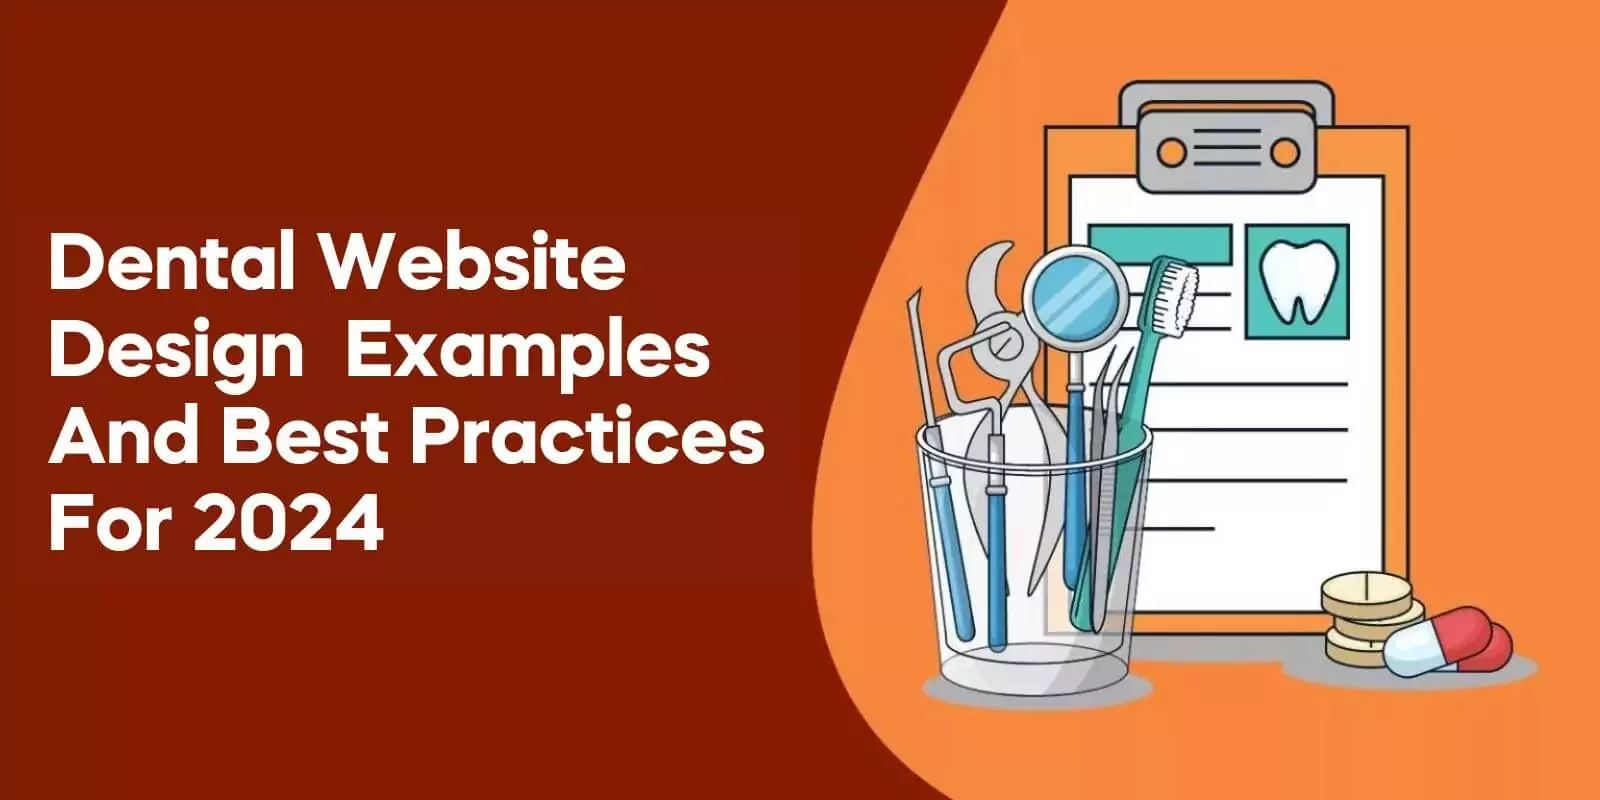 Dental Website Design Examples and Best Practices for 2024